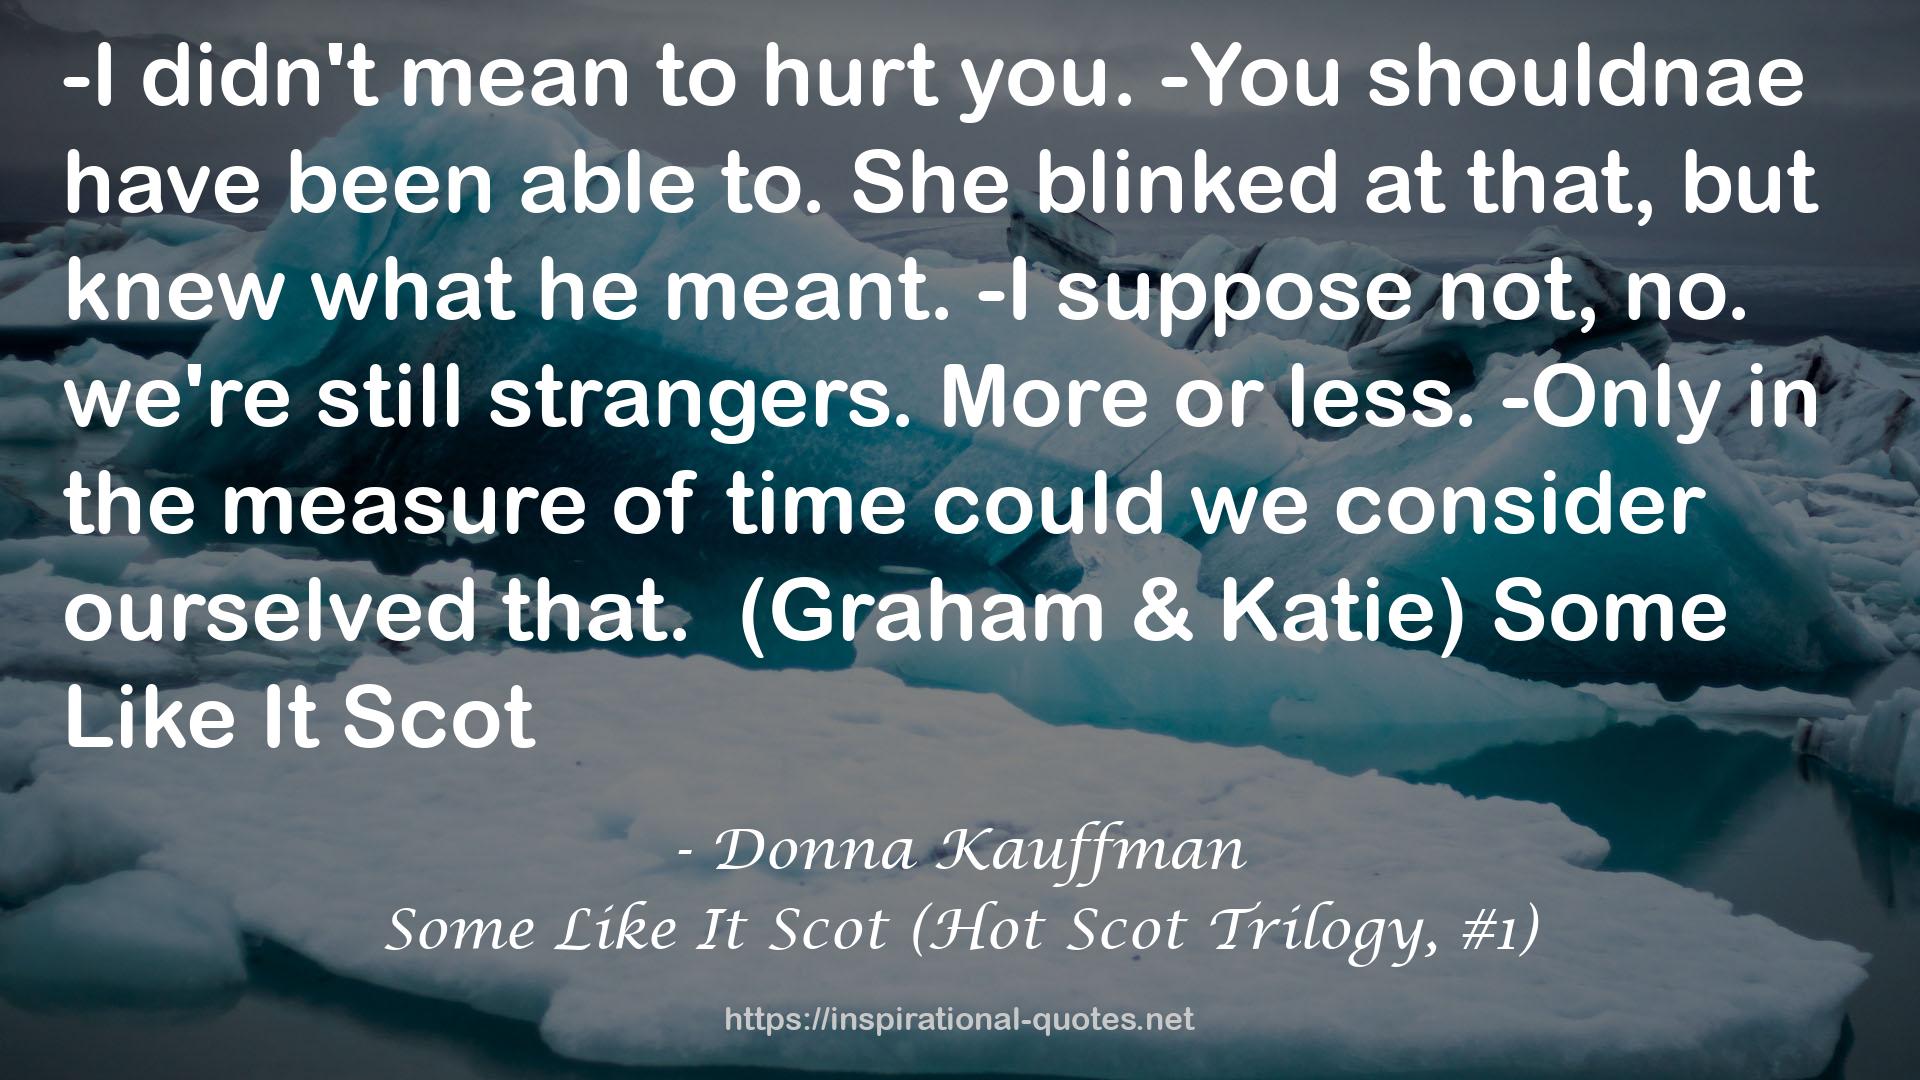 Some Like It Scot (Hot Scot Trilogy, #1) QUOTES